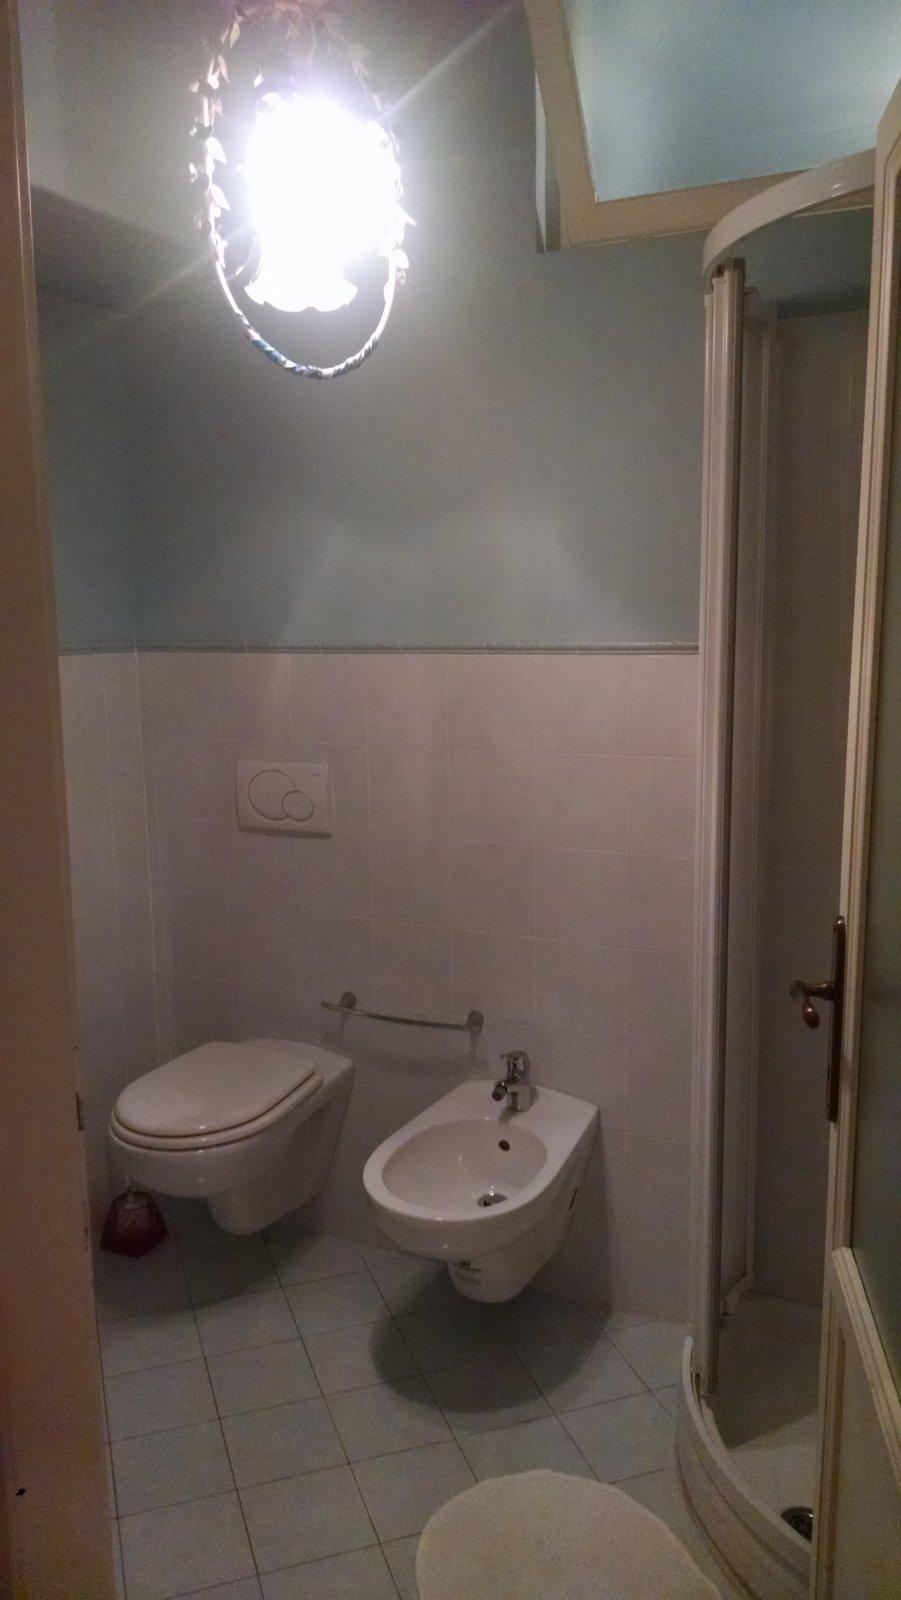 The larger of two bathrooms.